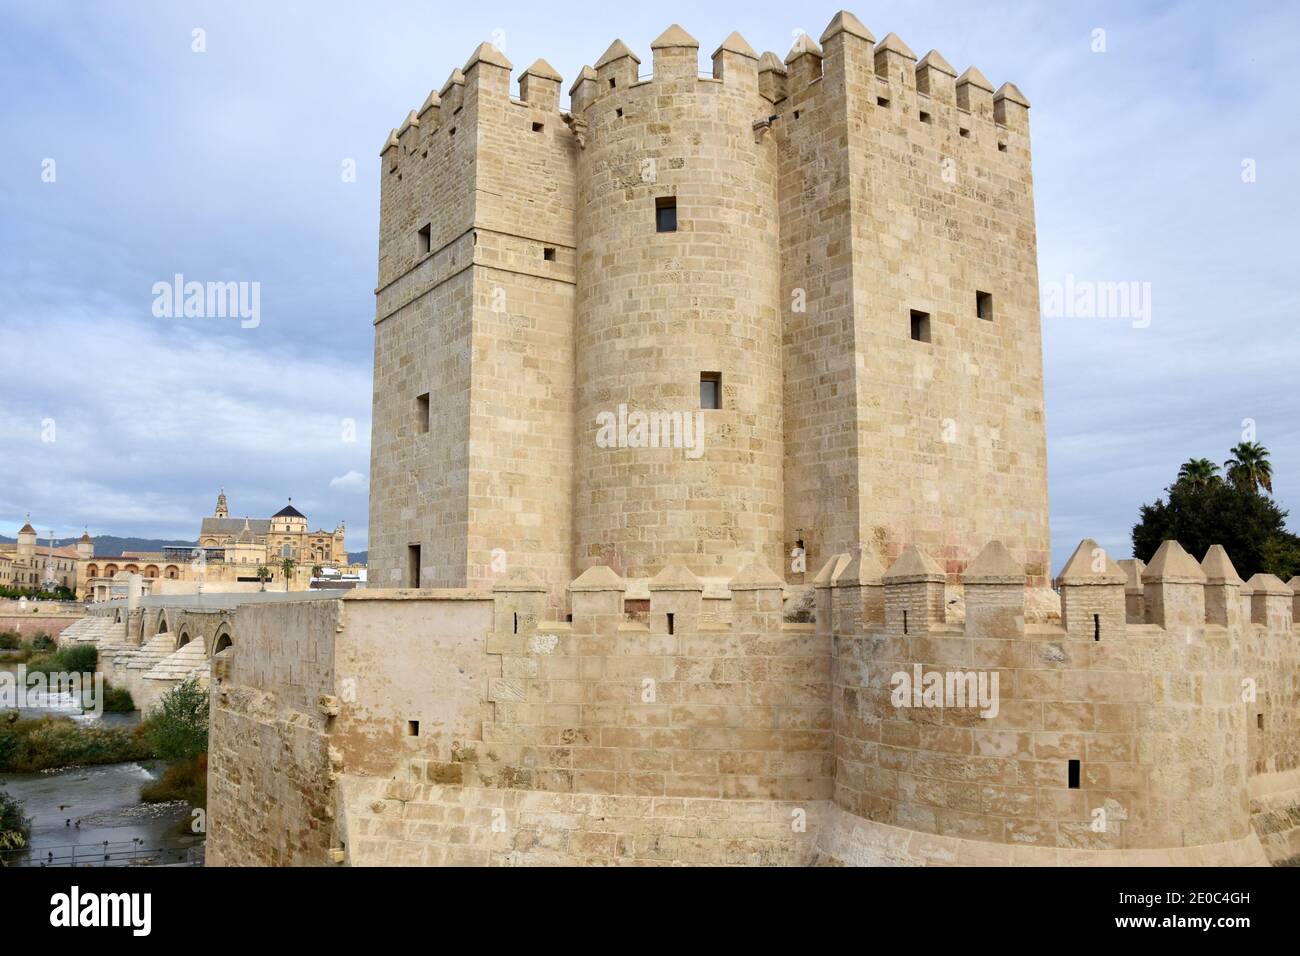 Spain, Cordoba, the Calahorra tower is a fortified gate, built in the 12th century to protect the Roman bridge, it was declared historical, monument. Stock Photo